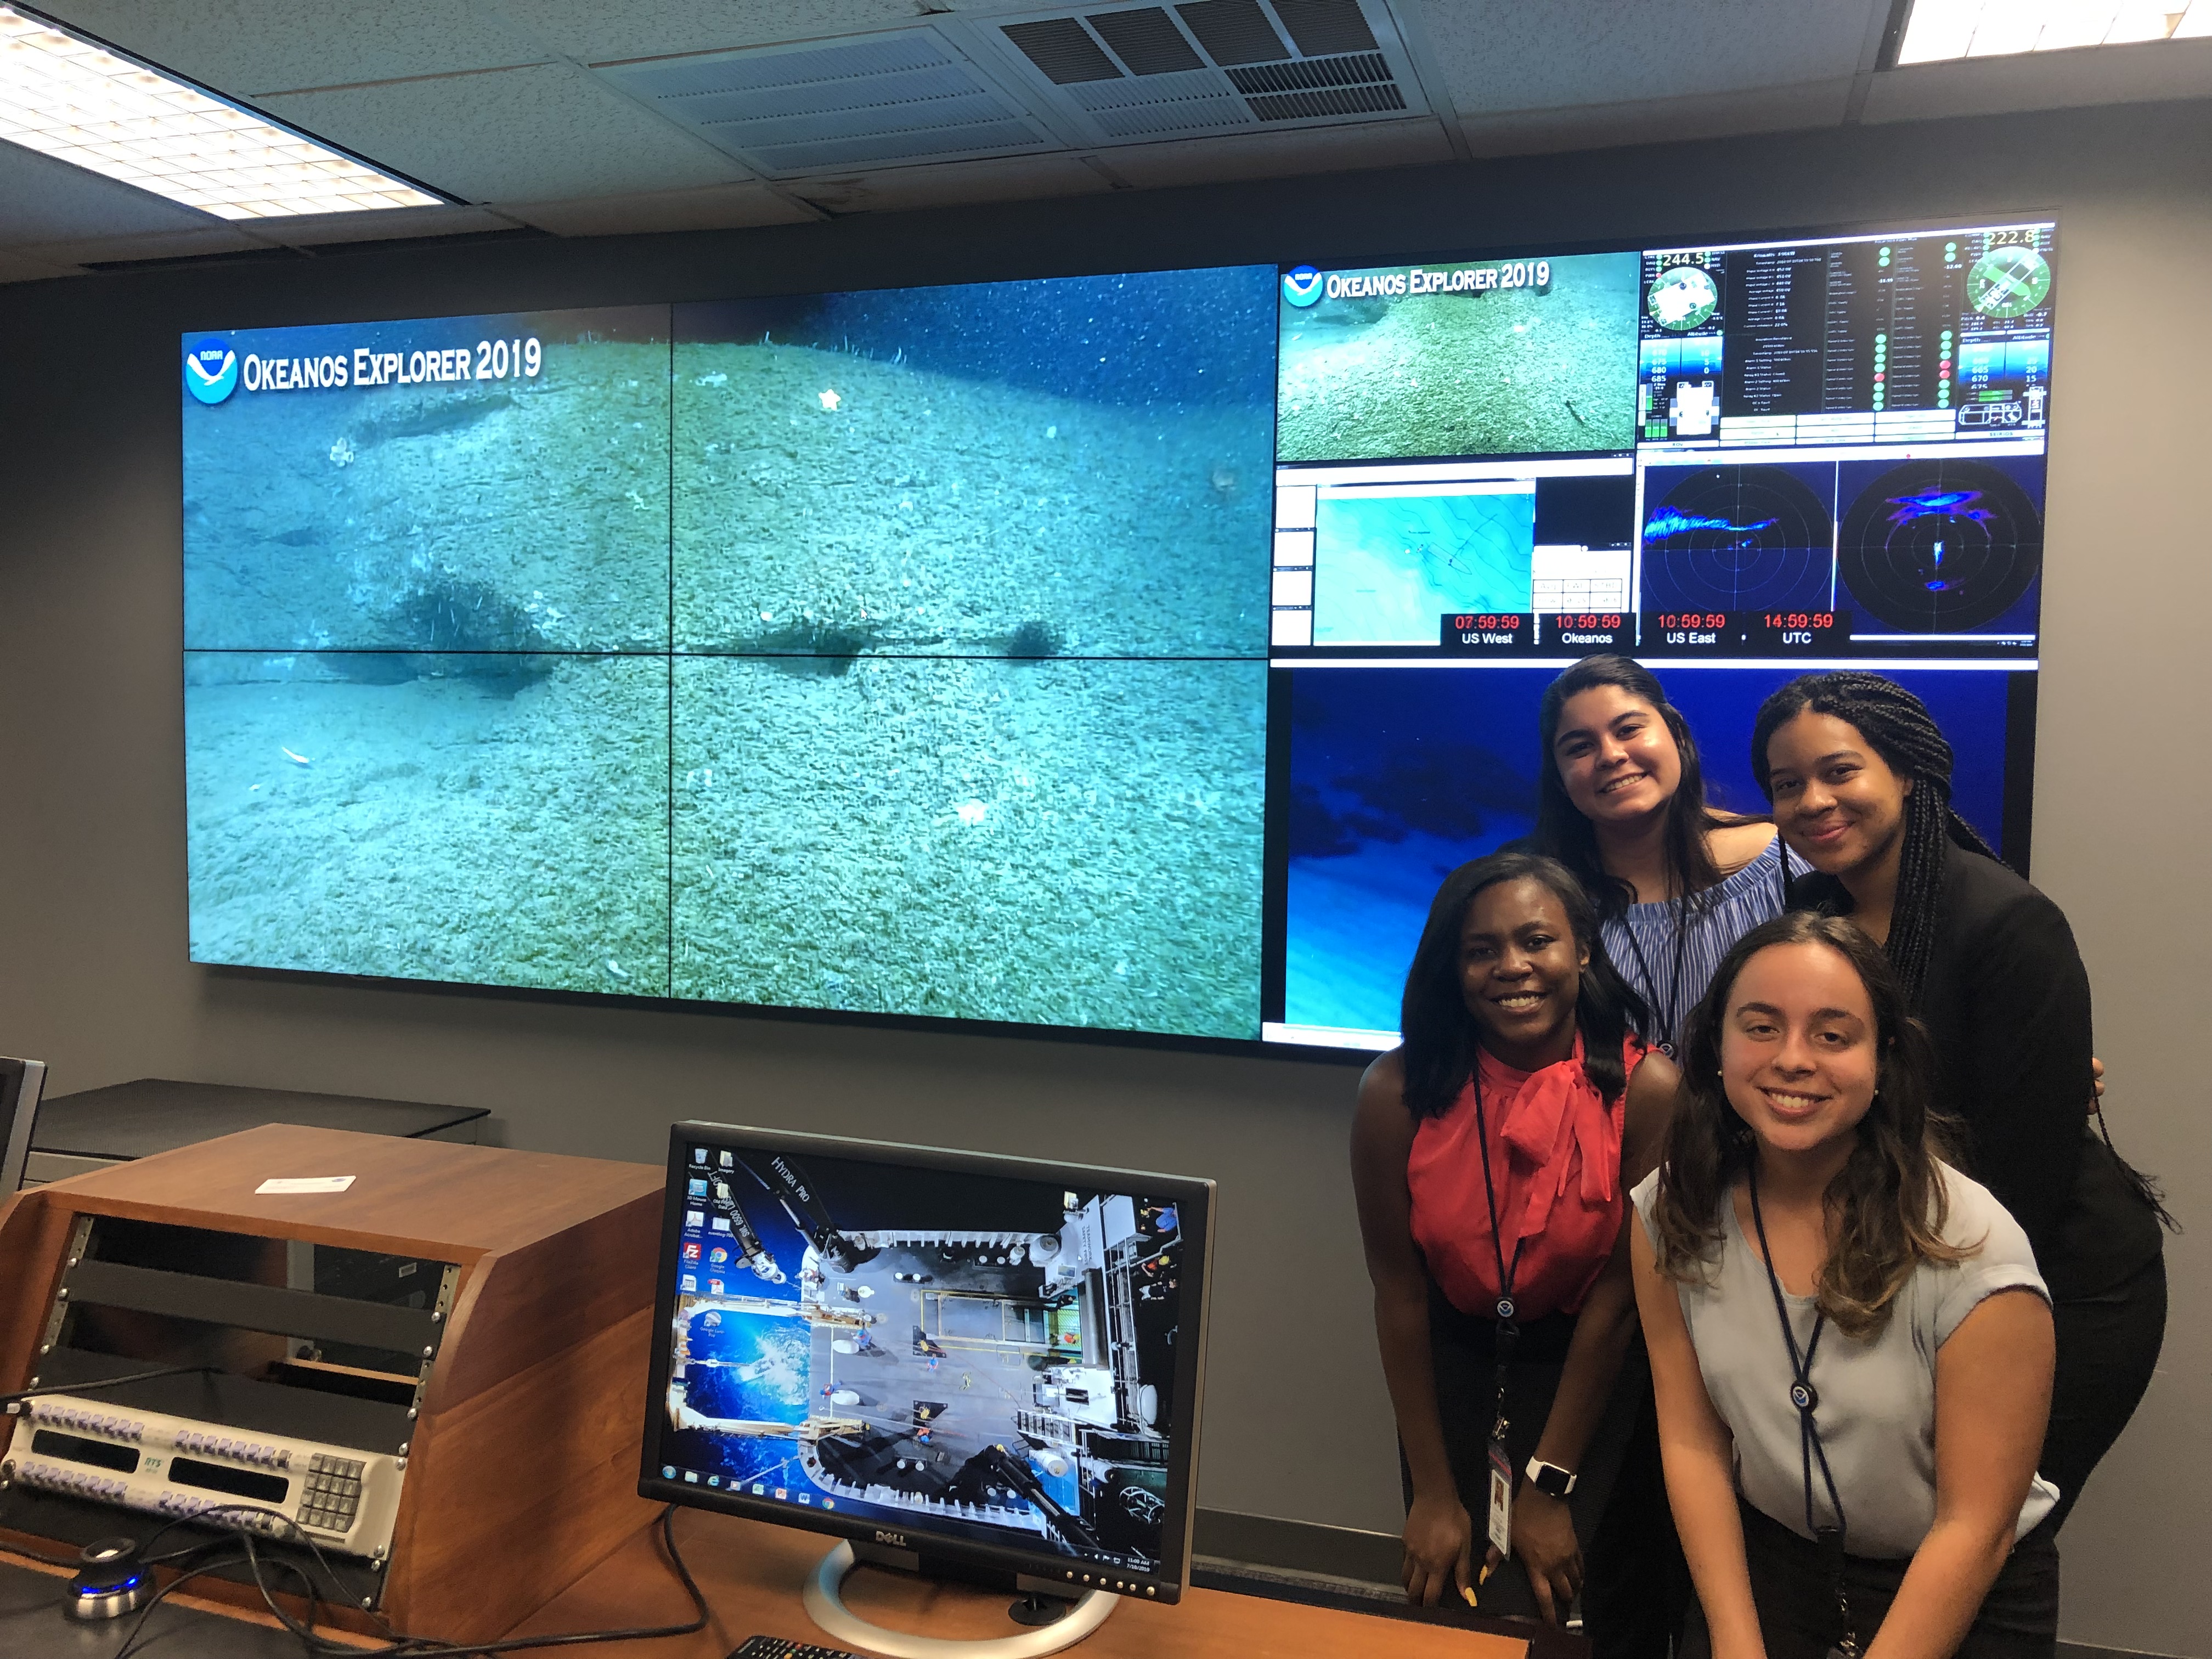 Educational Partnership Program with Minority Serving Institutions scholars from the class of 2019 view ocean exploration footage from NOAA Ship Okeanos Explorer during scholar orientation at NOAA headquarters in Silver Spring, Maryland. Top row: Jezella Peraza, Elyse Bonner Bottom row: JaNia Dunbar, Paola Santiago